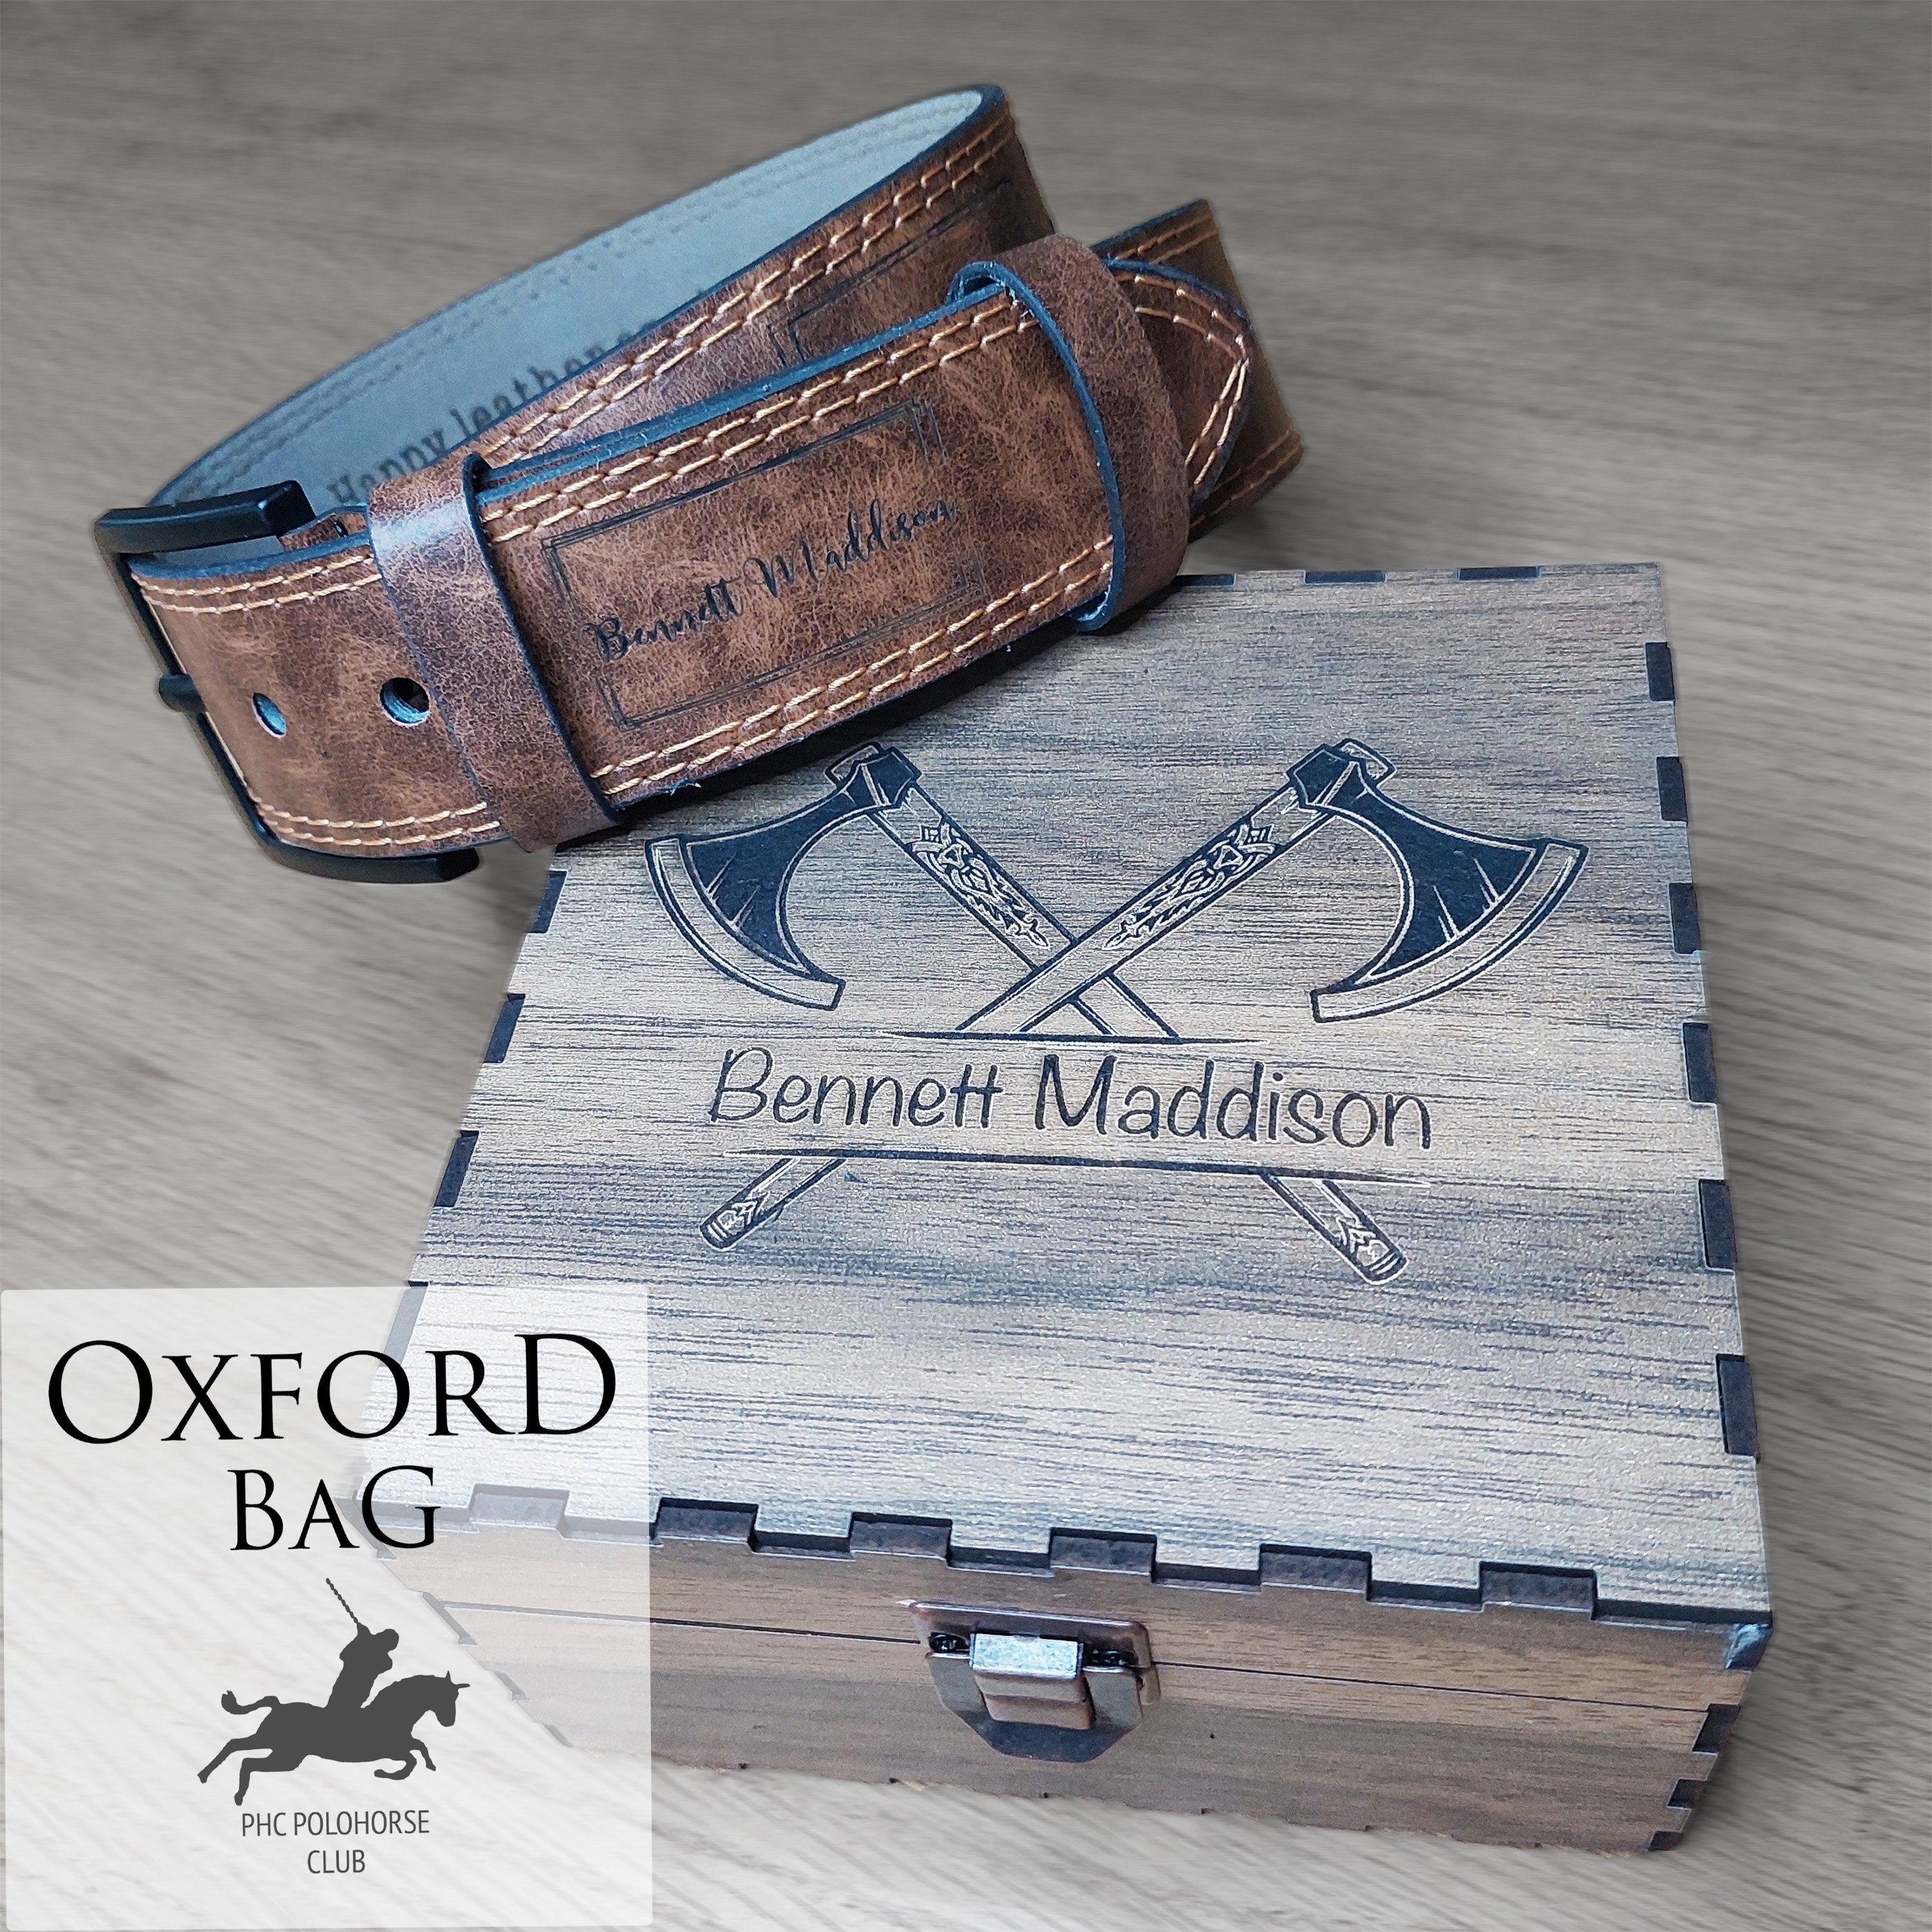 Personalized Perfection: Custom Laser Engraved Leather Belt Waist 36”